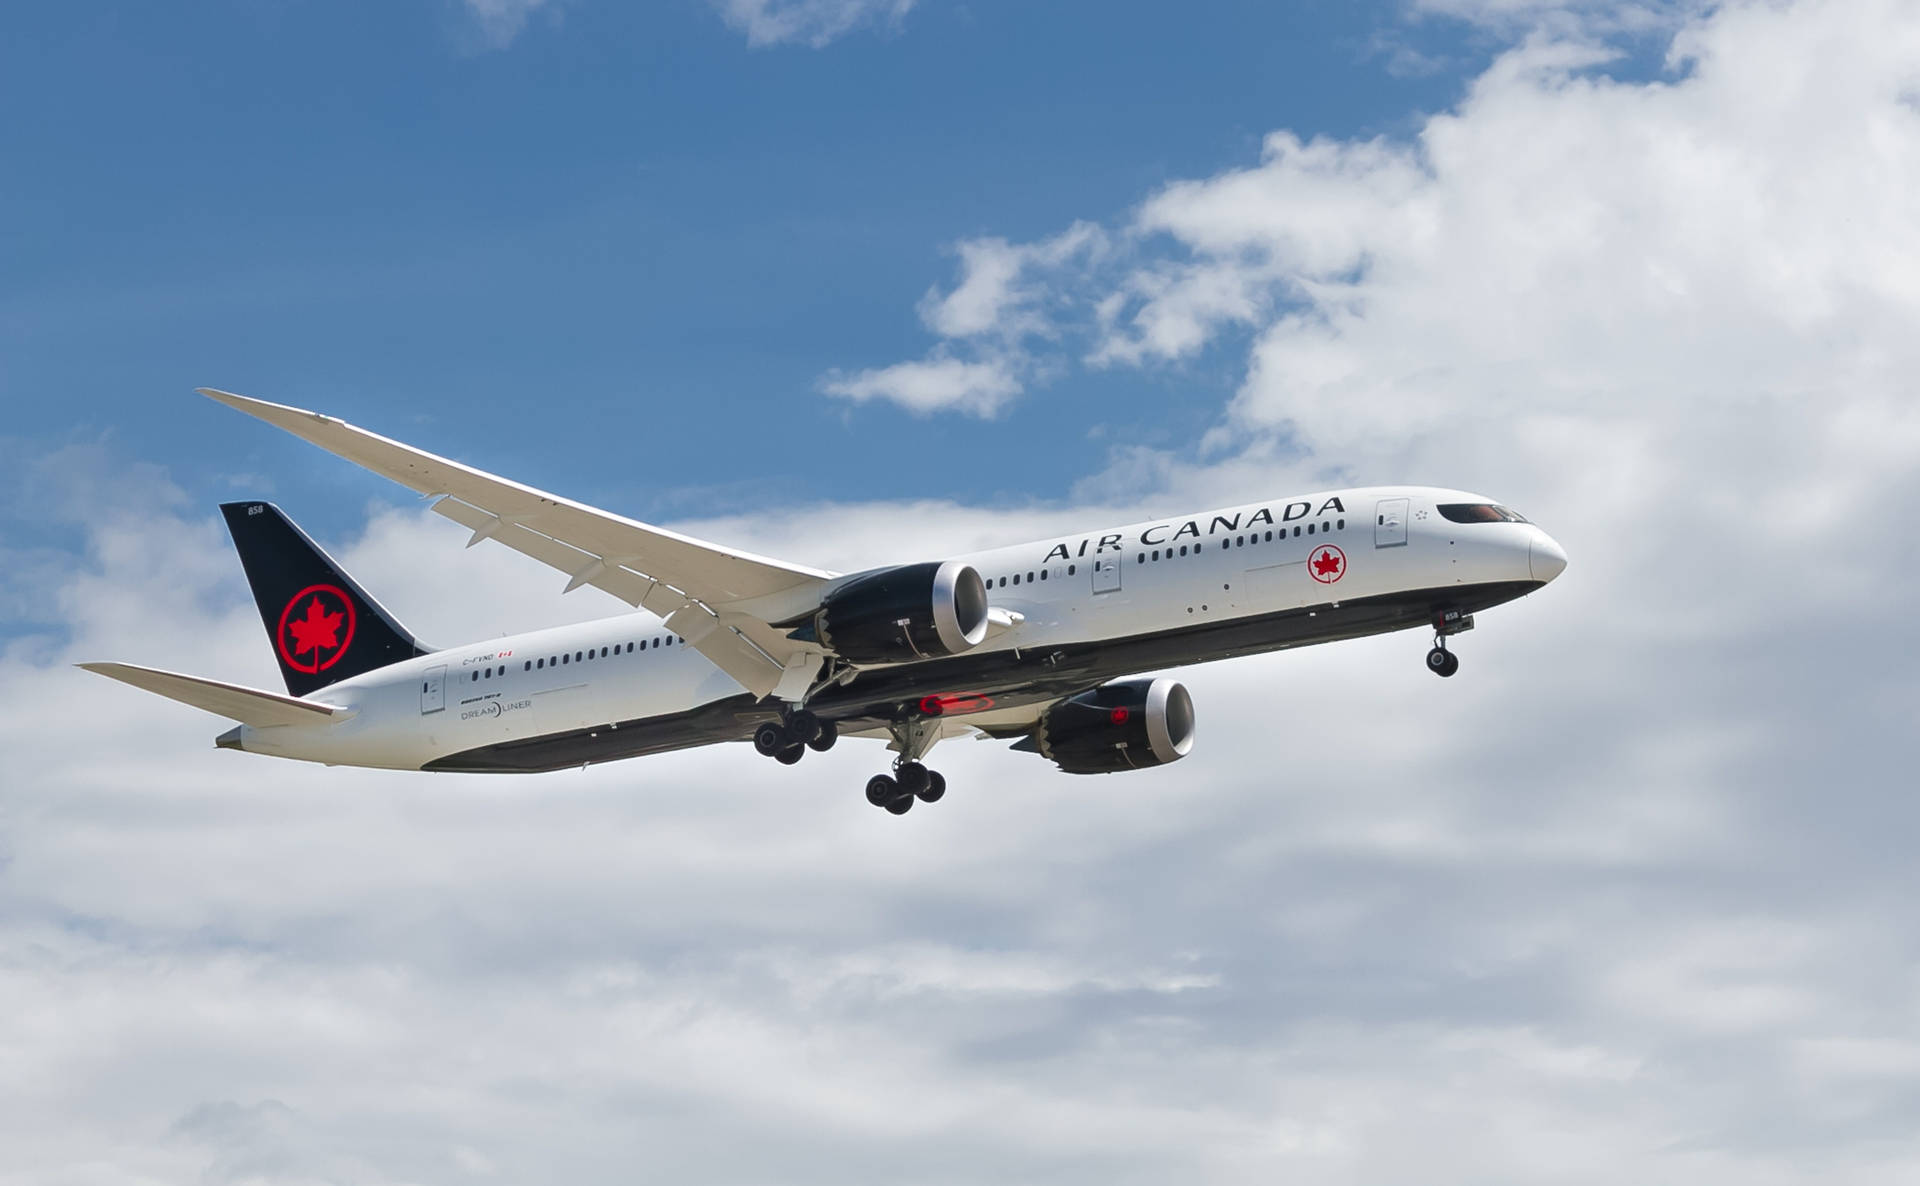 Air Canada Airplane Low Angle Wallpaper